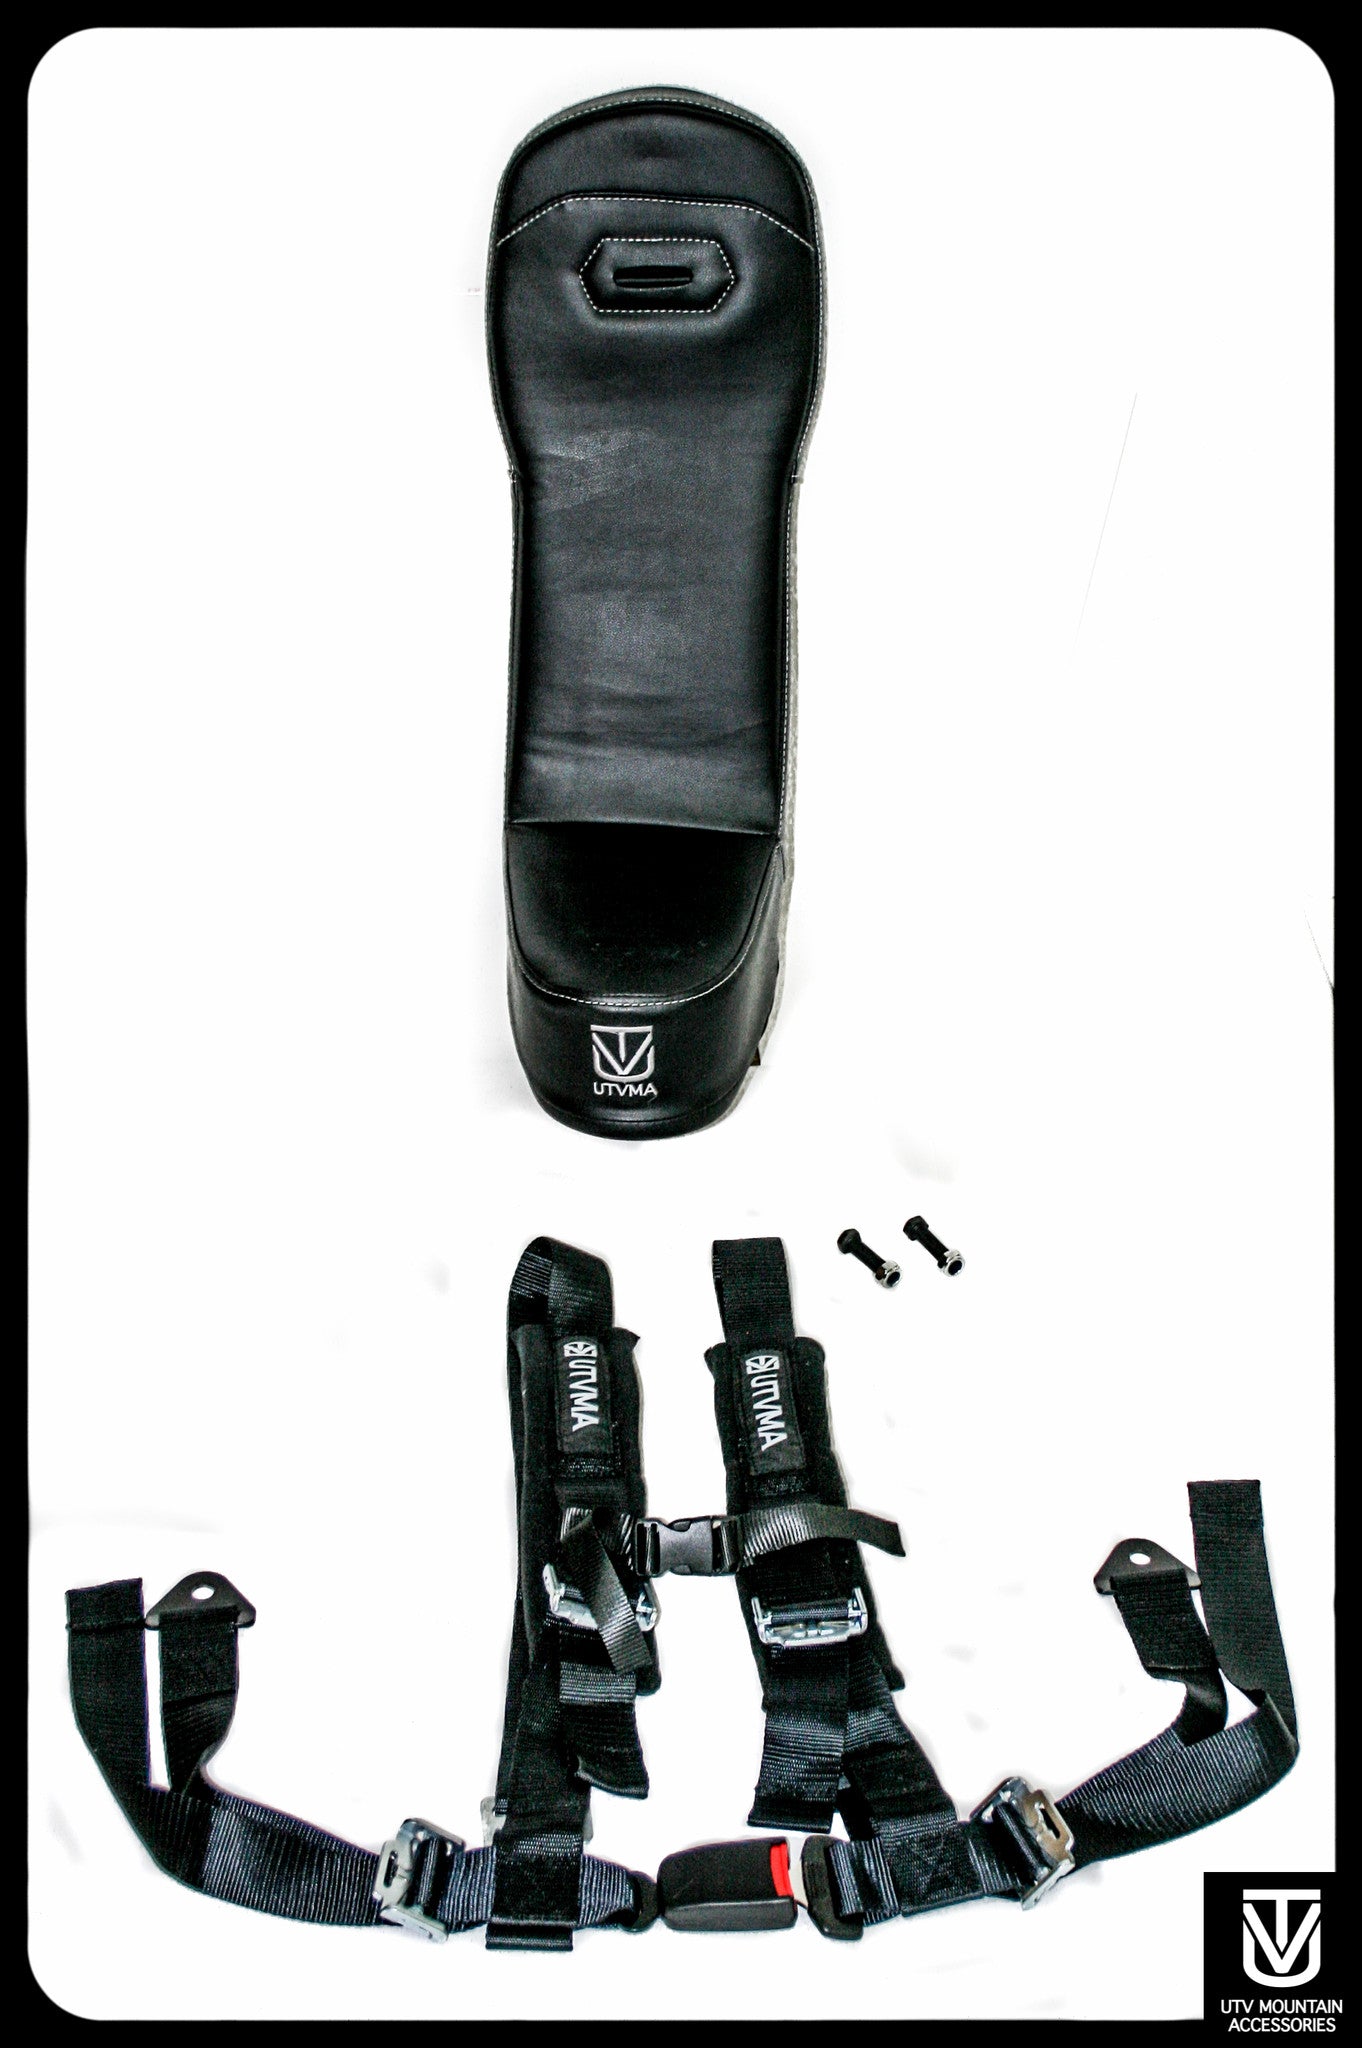 Teryx 4 Front and Rear Bump Seat